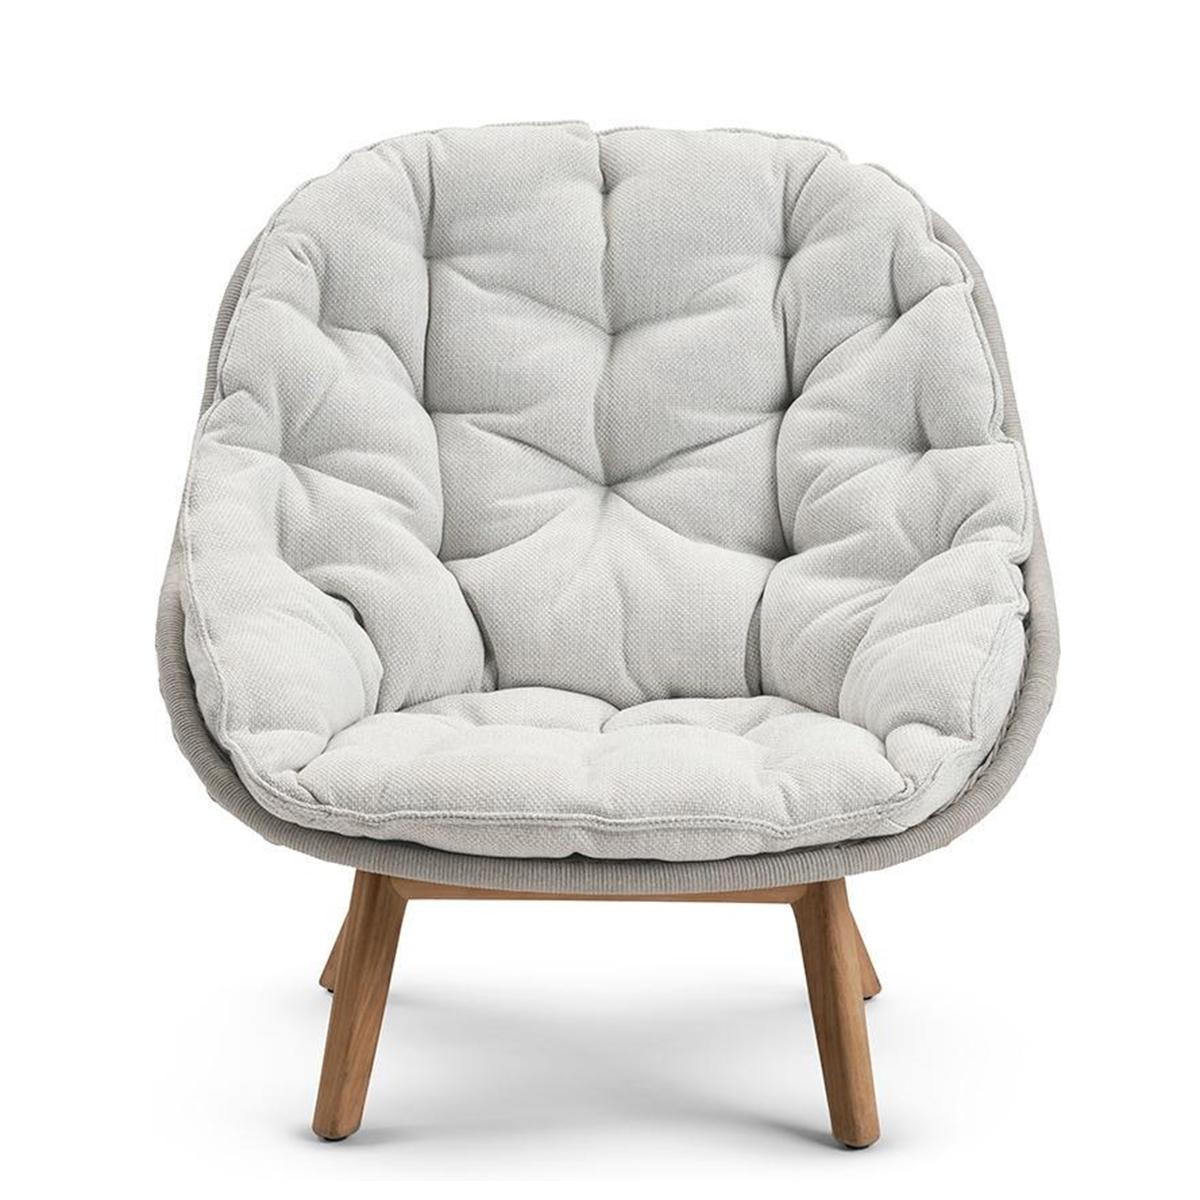 Armchair Lonam Natura with structure in solid teak in natural finish,
back seat structure in wicker and cord alliage in clear beige finish, 
with upholstered seat covered in cream outdoor fabric (Cat B.).